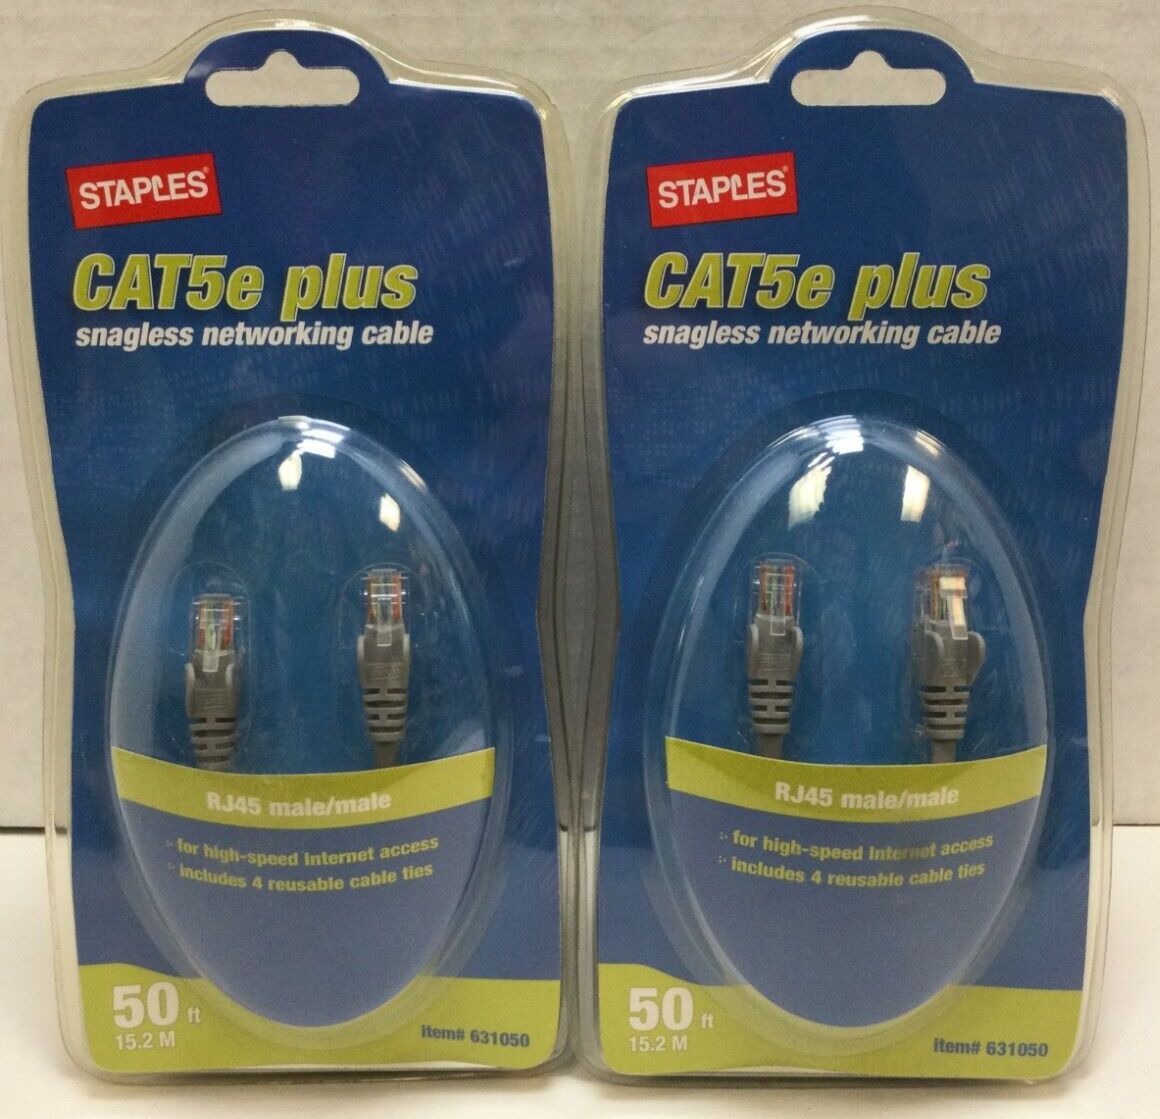 2x CAT5e Plus Snagless Networking Cable, 50 Foot, New, 